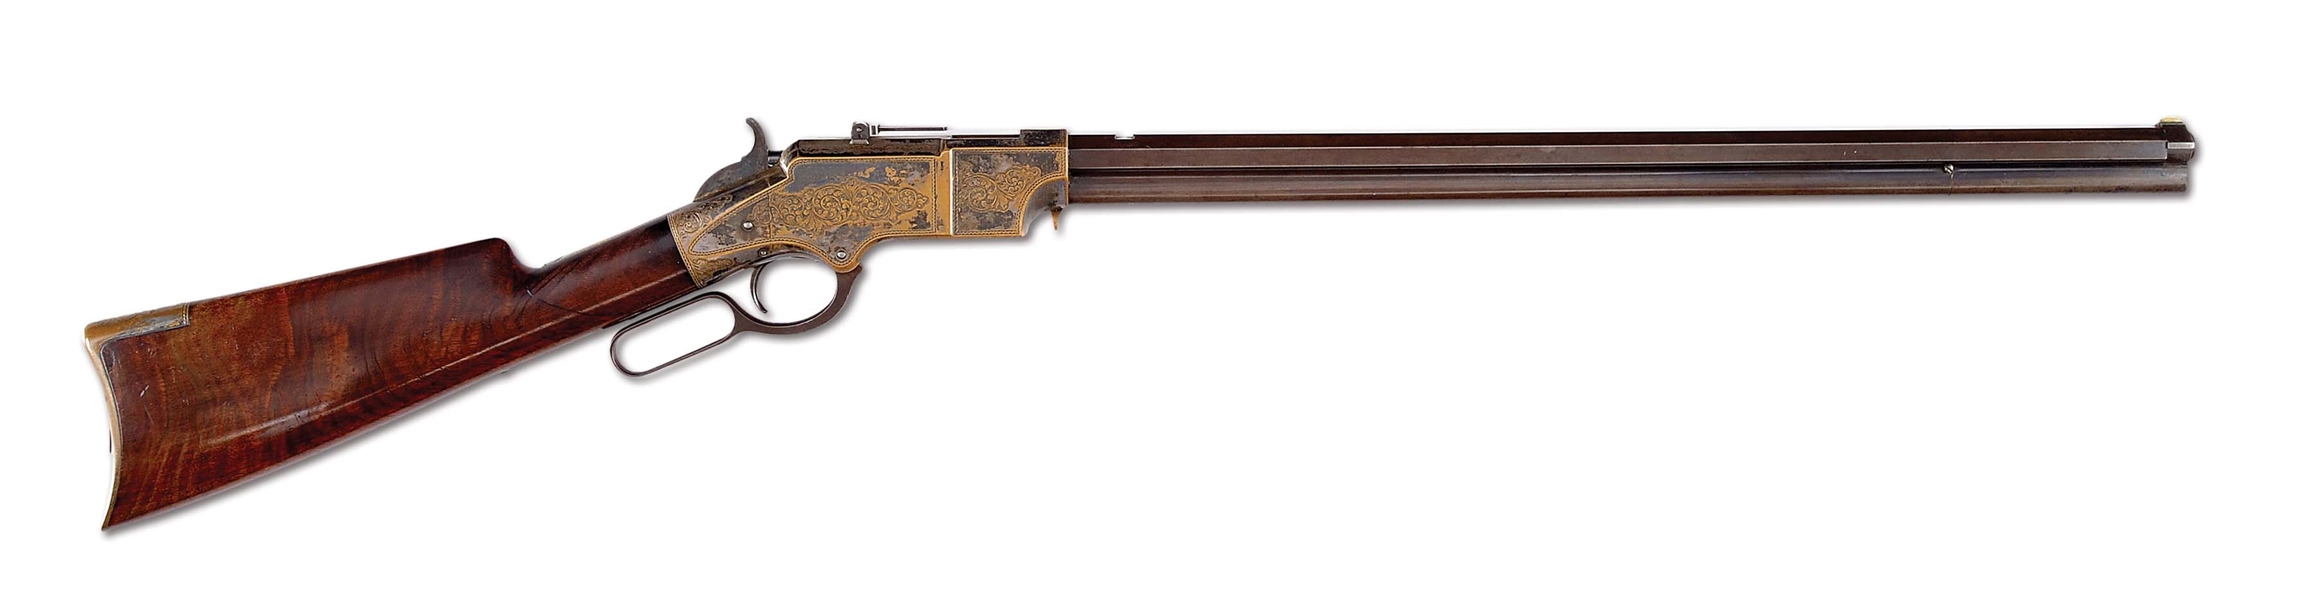 (A) MAGNIFICENT HENRY 1860 RIFLE ENGRAVED & SILVER PLATED WITH DELUXE WOOD (1ST YEAR - 1860).